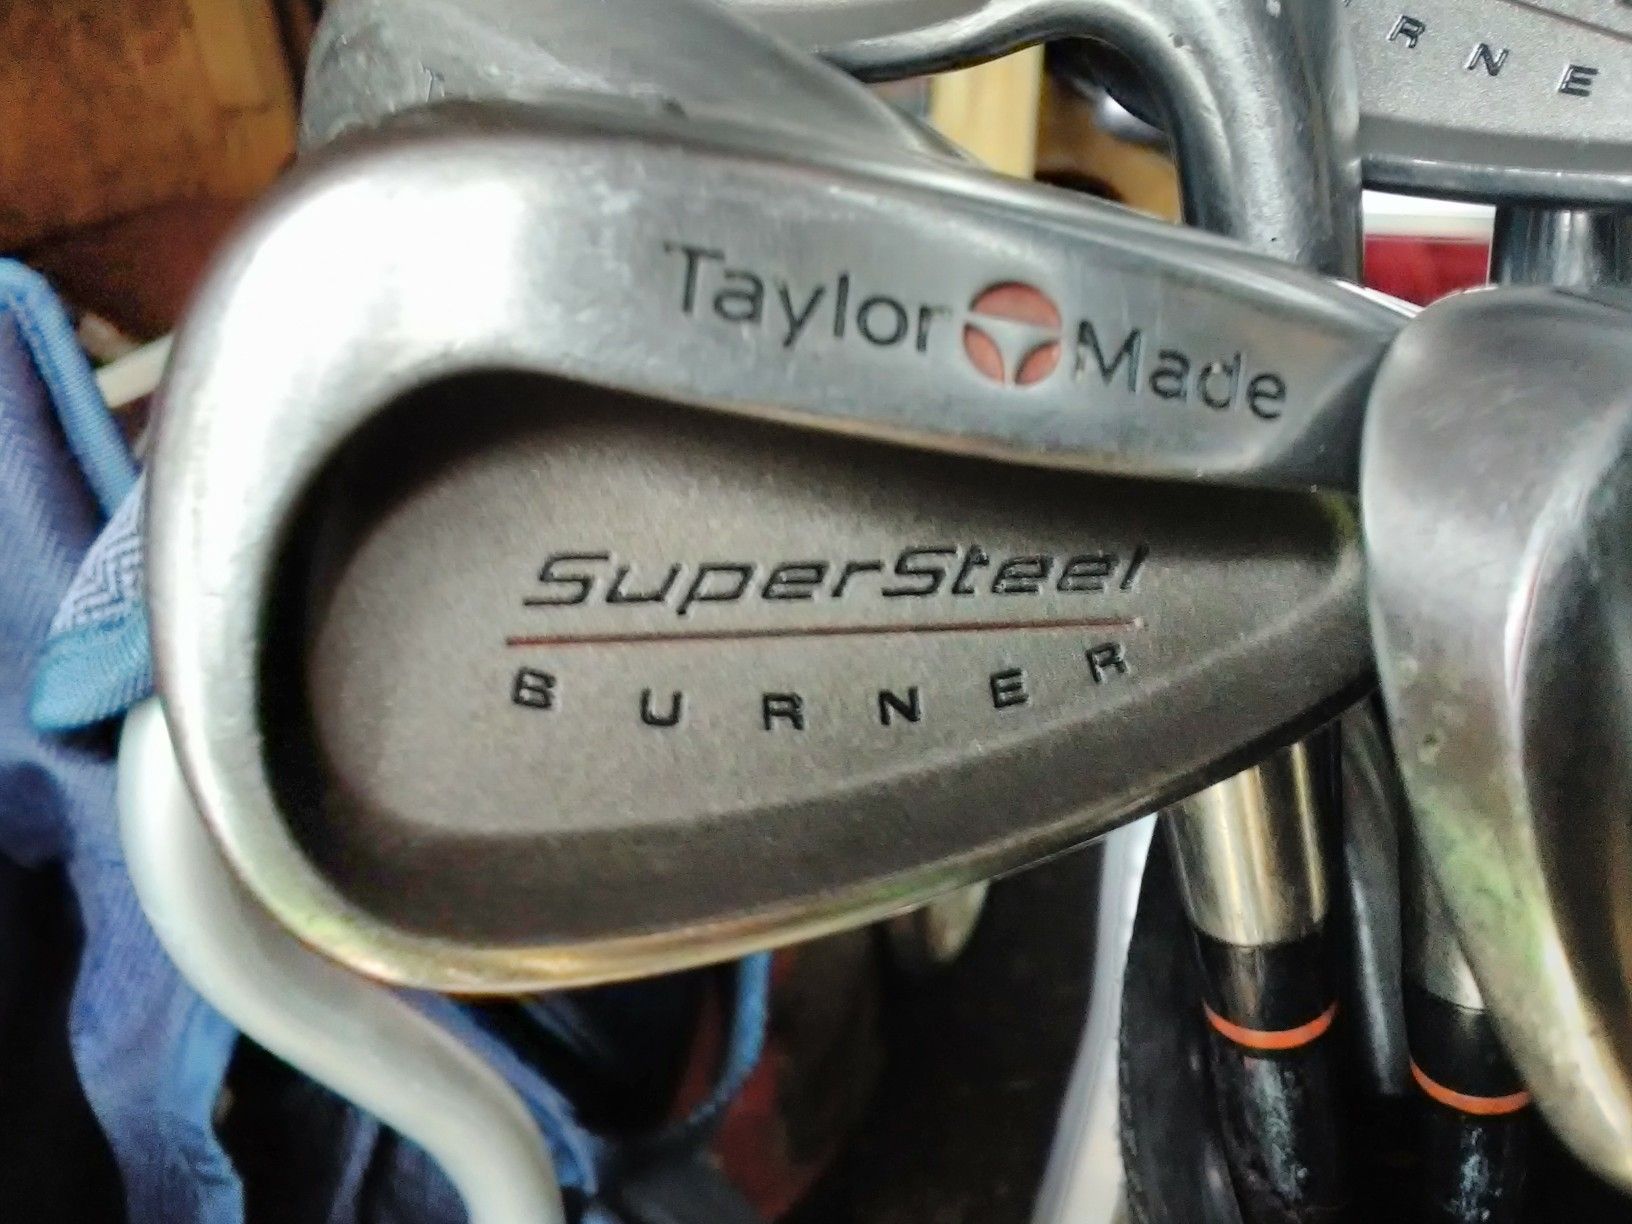 TaylorMade irons 3-9 supersteel burner edition plus bag and extras